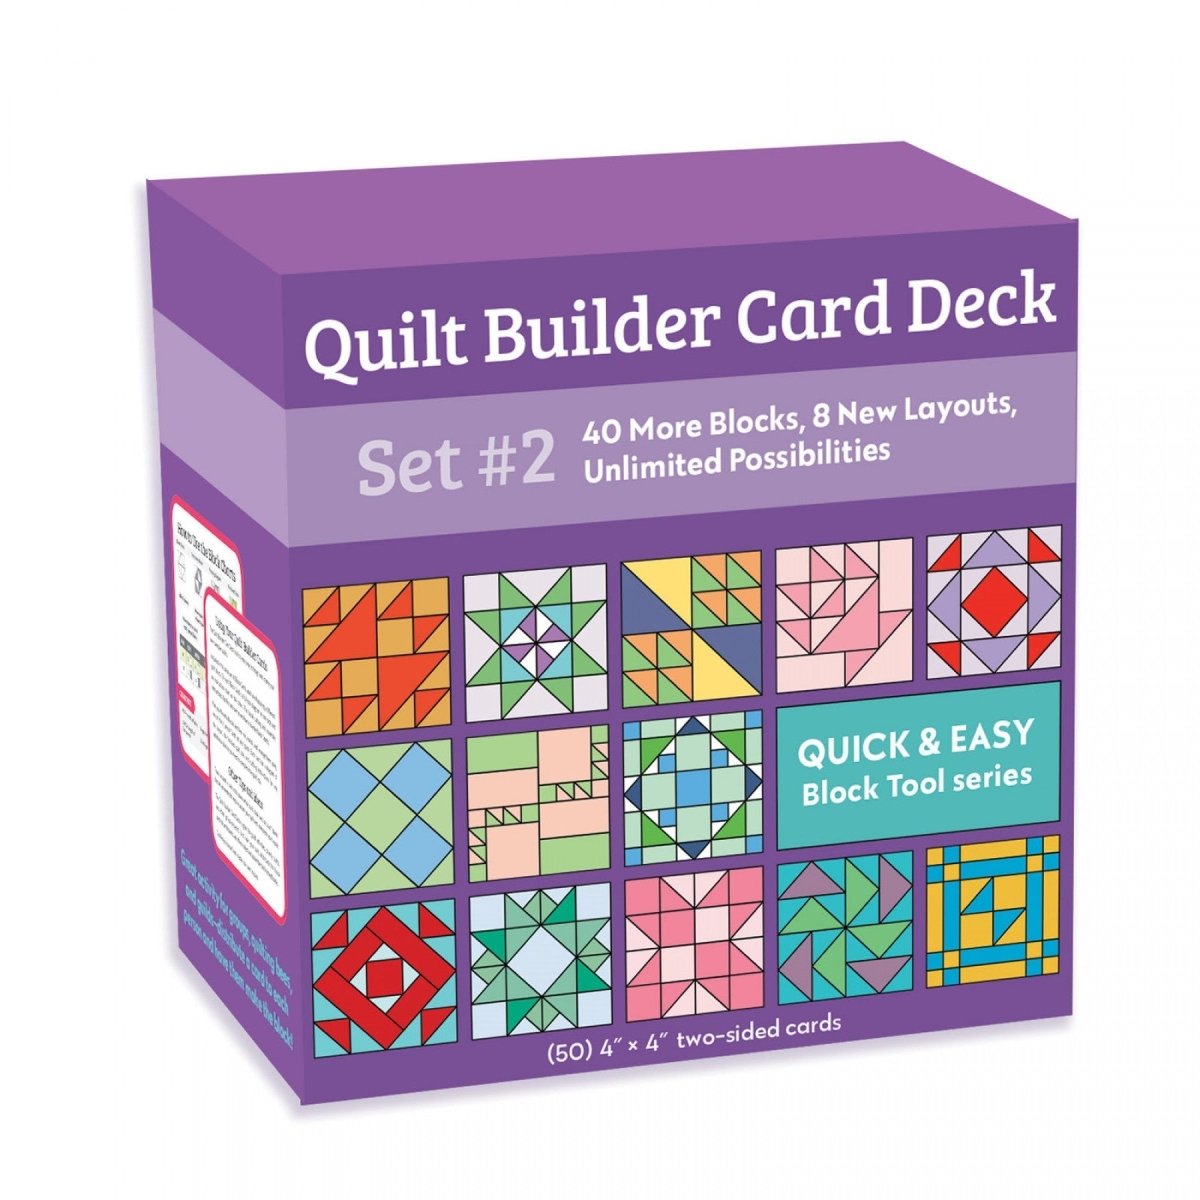 Quilt Builder Card Deck Set #2: 40 New Blocks, 8 New Layouts, Unlimited Possibilities - #CTP20491 -CTP20491 - Justin Fabric!